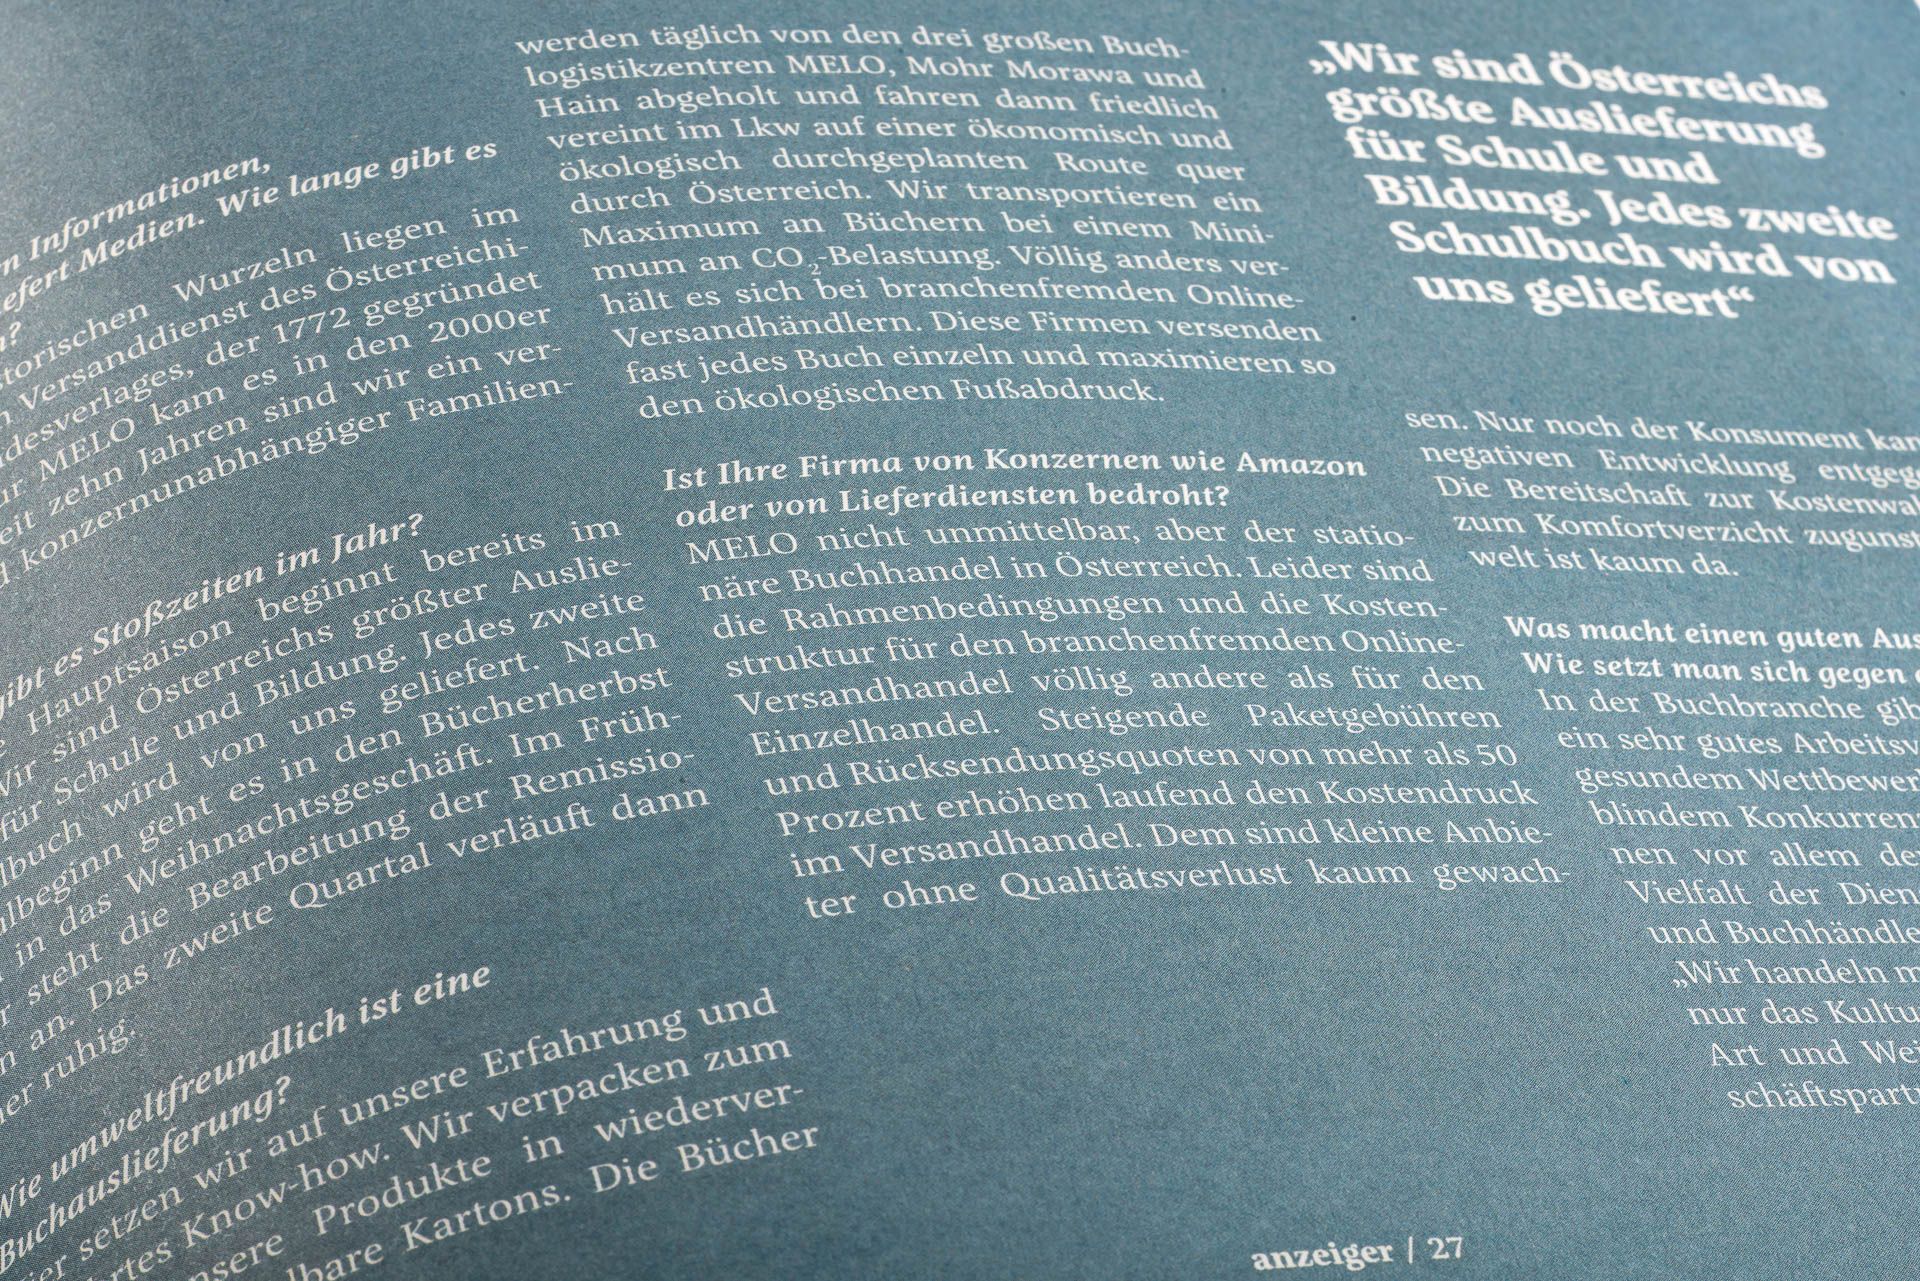 Magazin Anzeiger font in use Liber Type Foundry